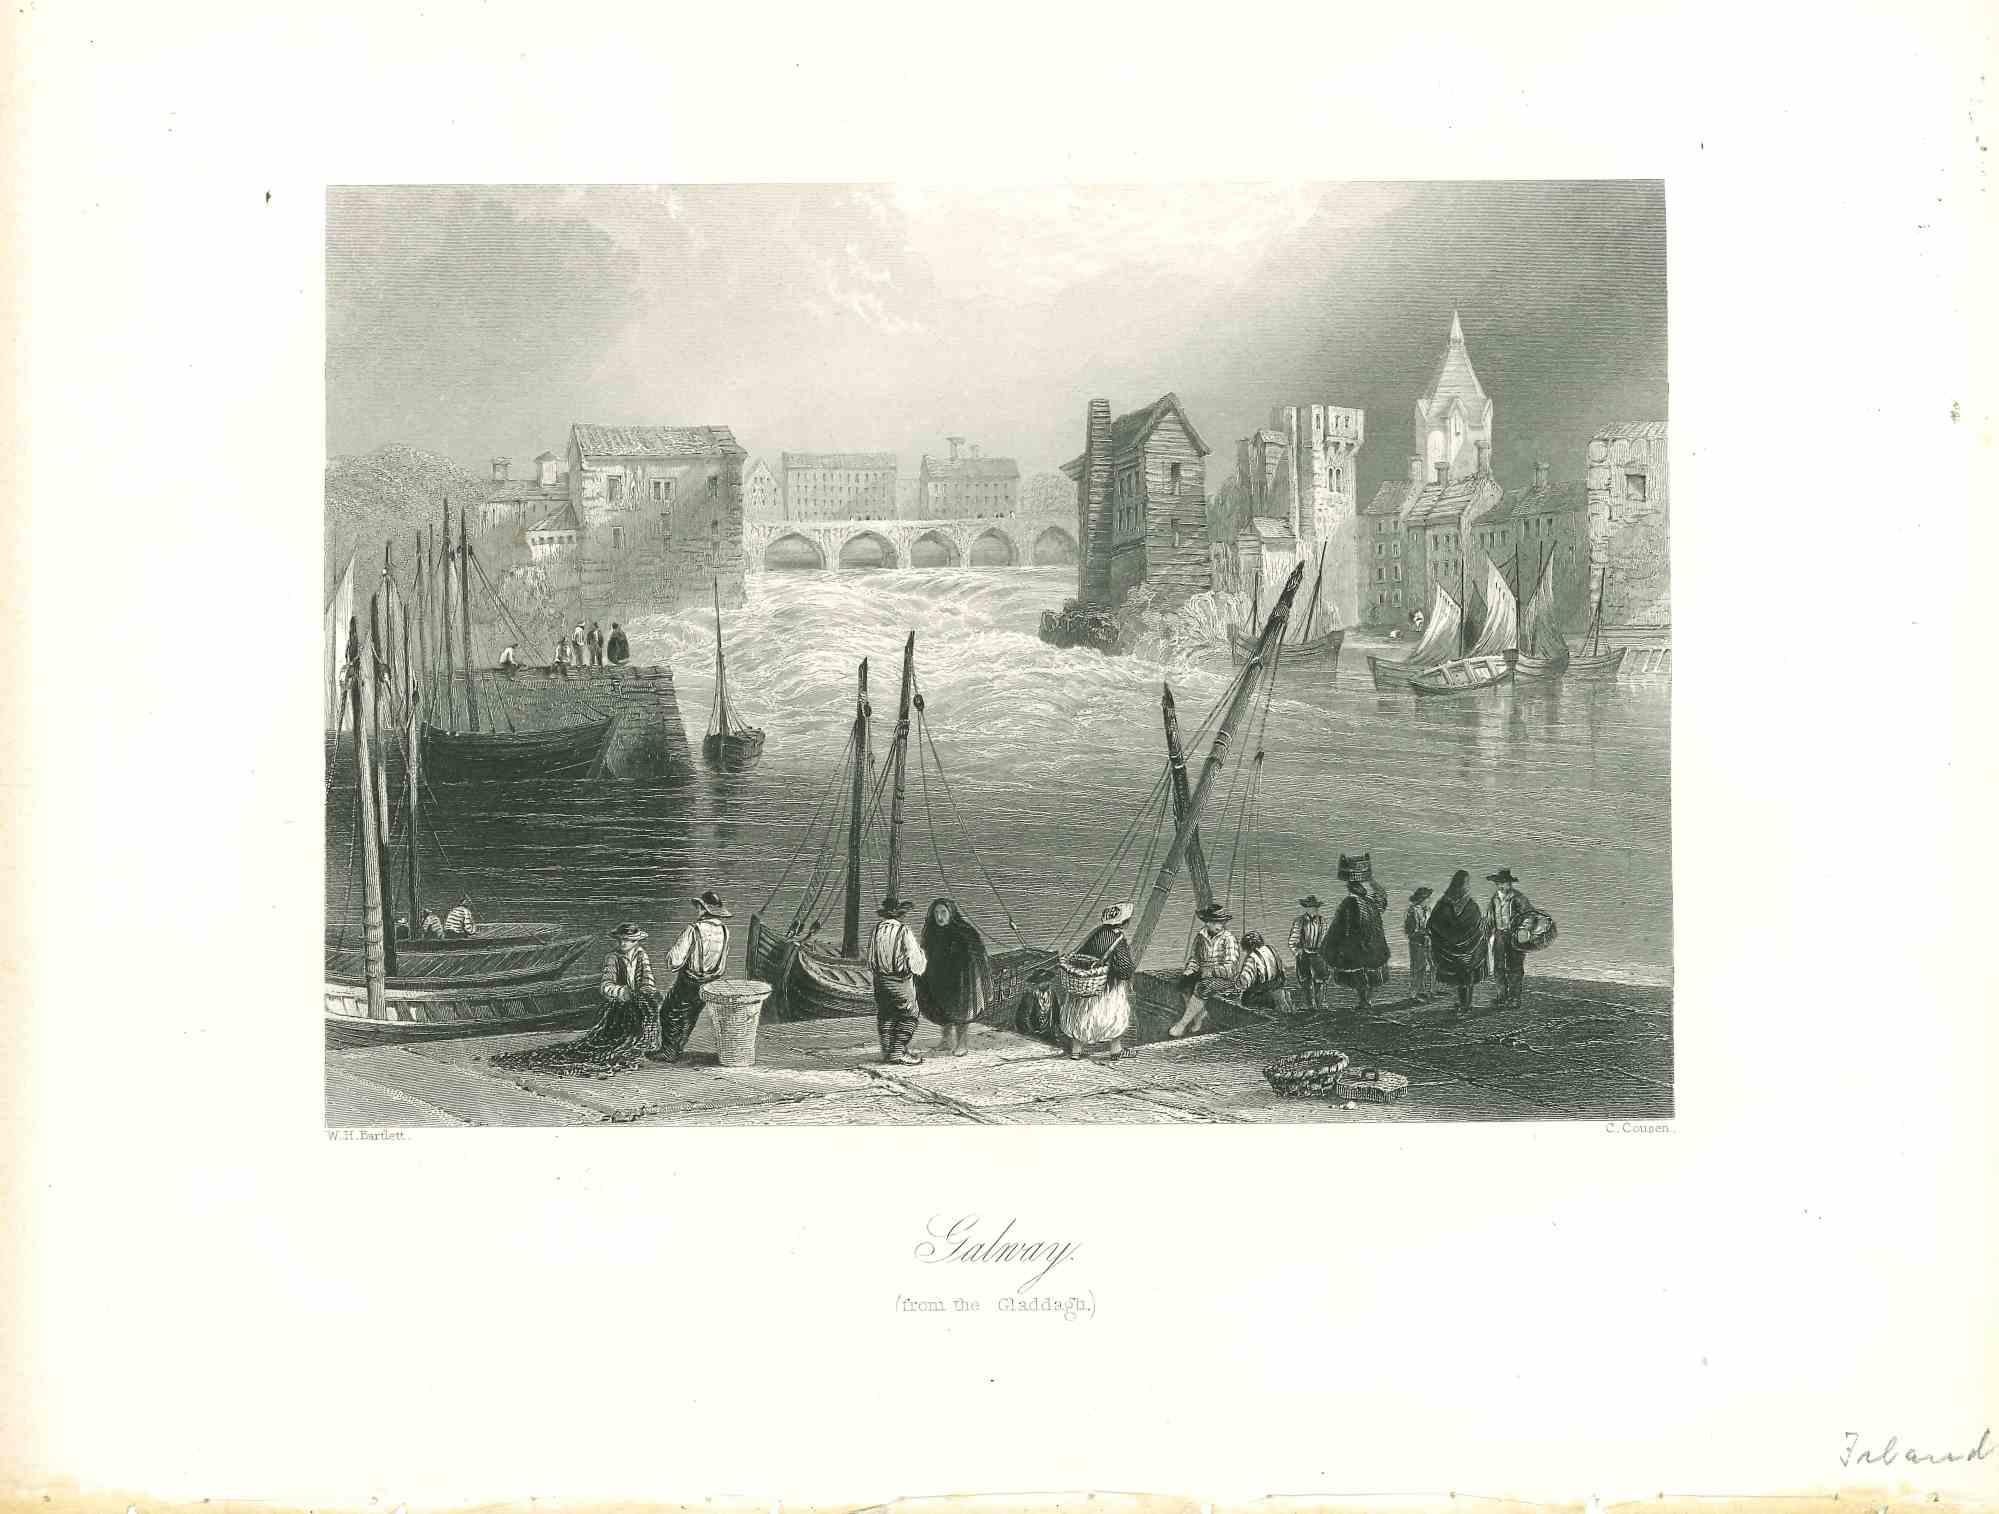 Unknown Landscape Print - Galnay - Original Lithograph - Mid-19th Century